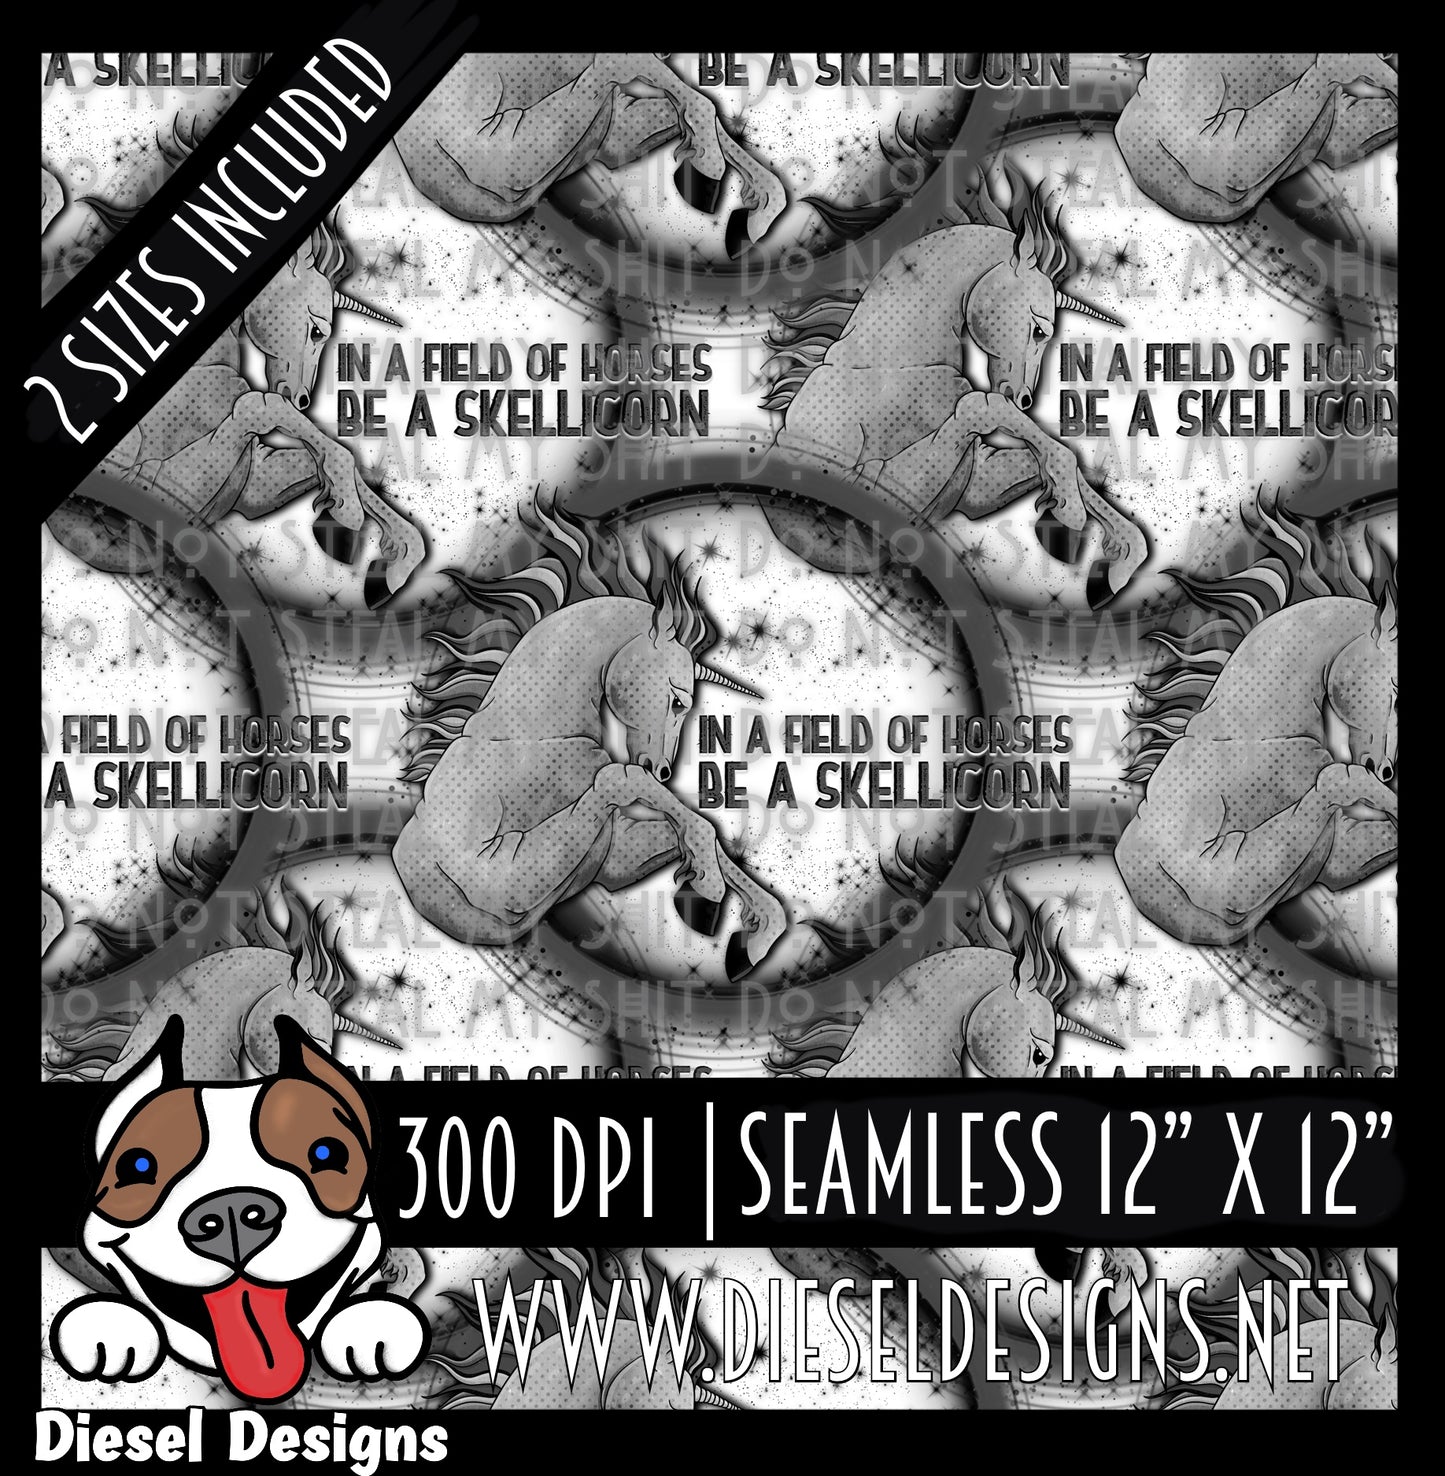 Skellicorn Seamless #1  | 300 DPI | Seamless 12"x12" | 2 sizes Included |